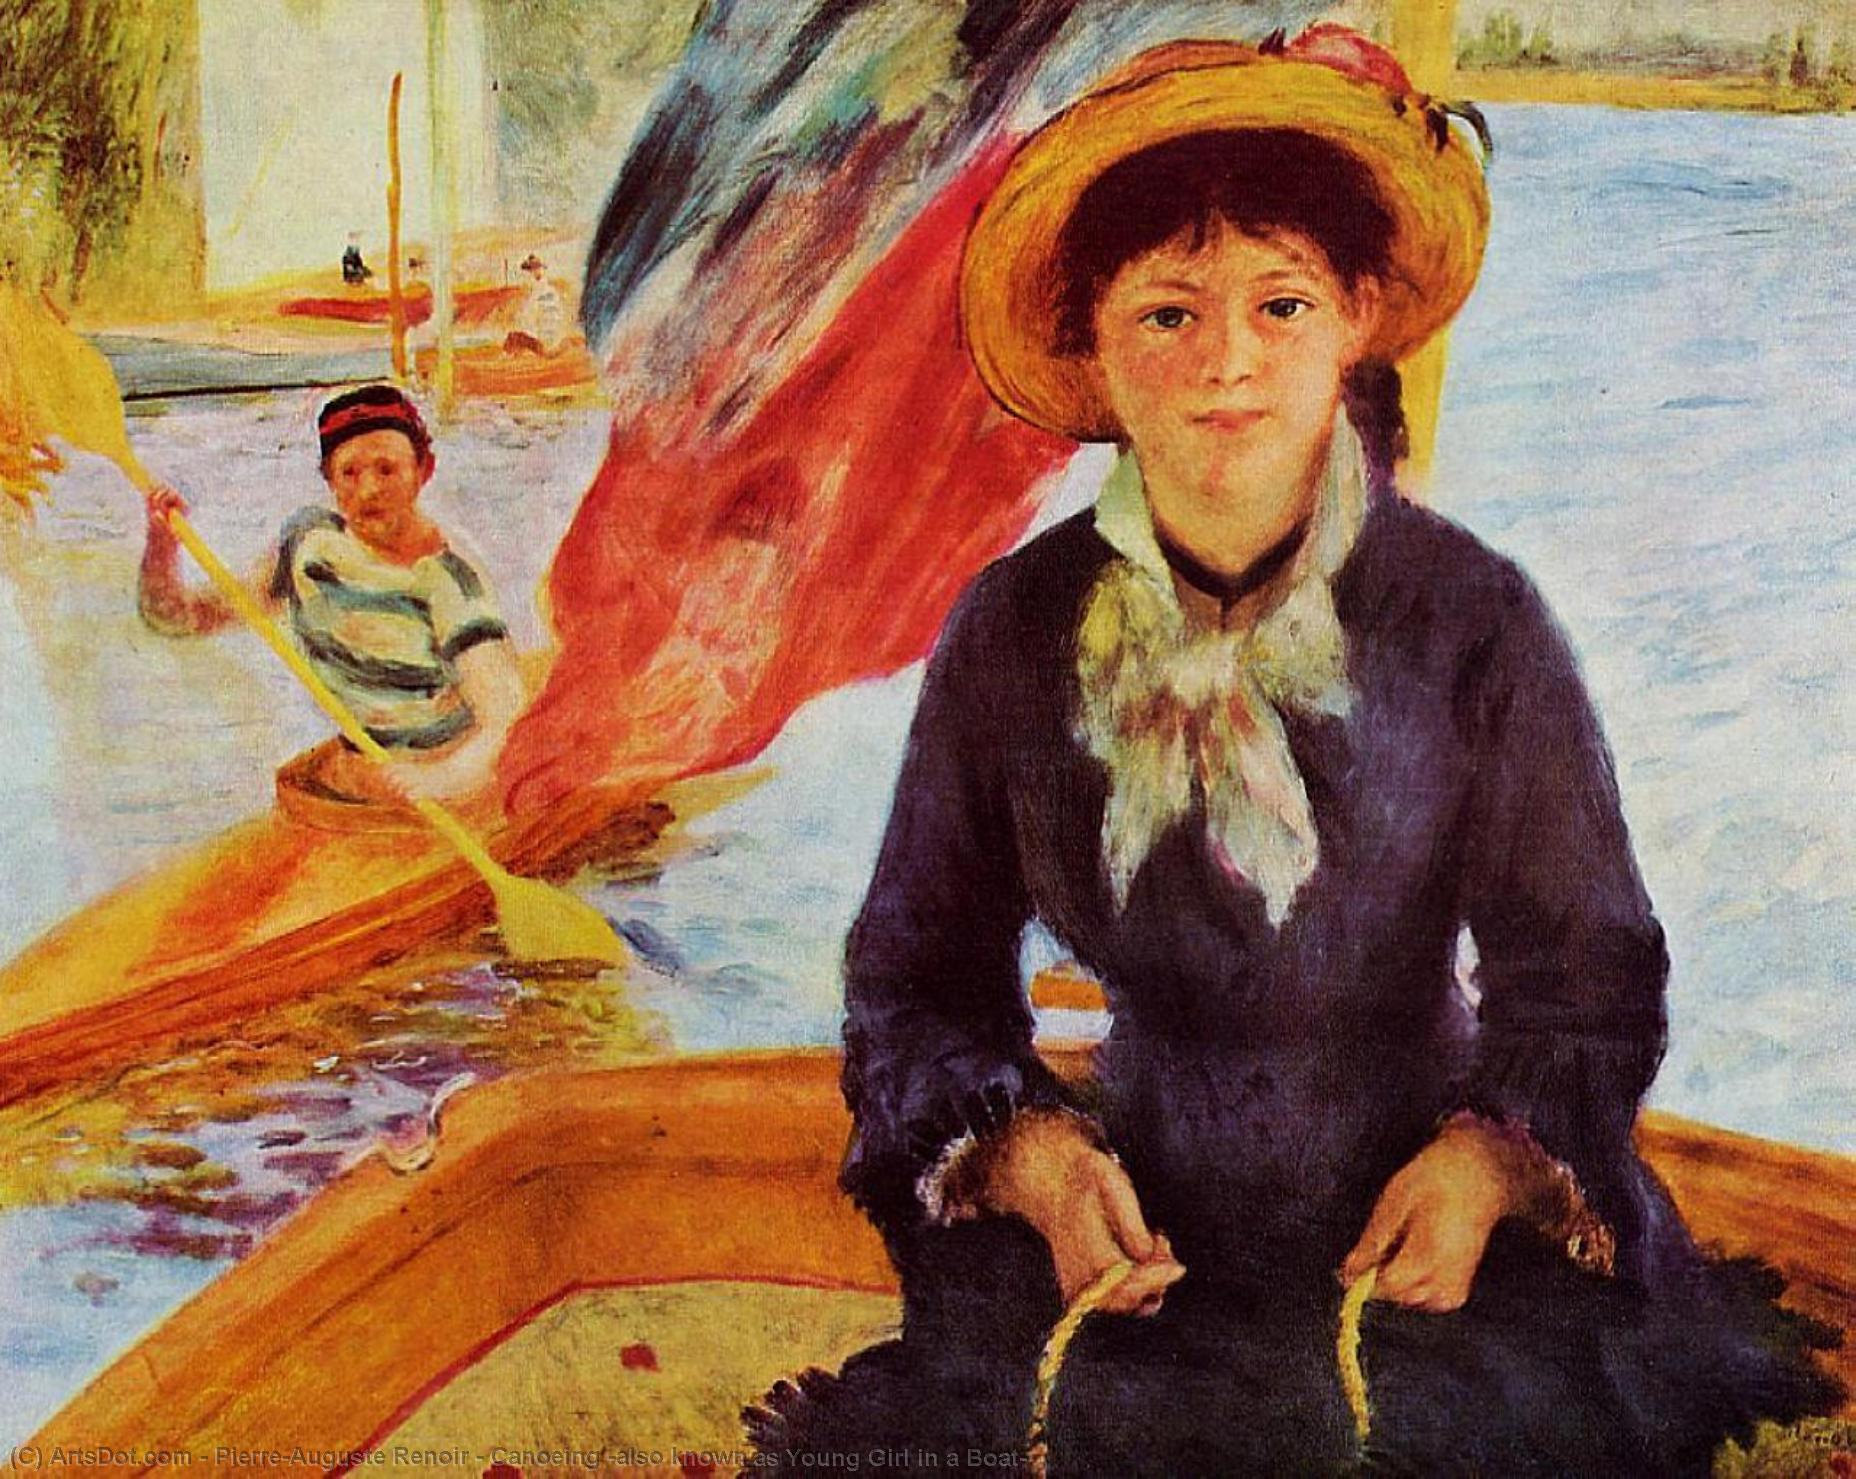 WikiOO.org - دایره المعارف هنرهای زیبا - نقاشی، آثار هنری Pierre-Auguste Renoir - Canoeing (also known as Young Girl in a Boat)